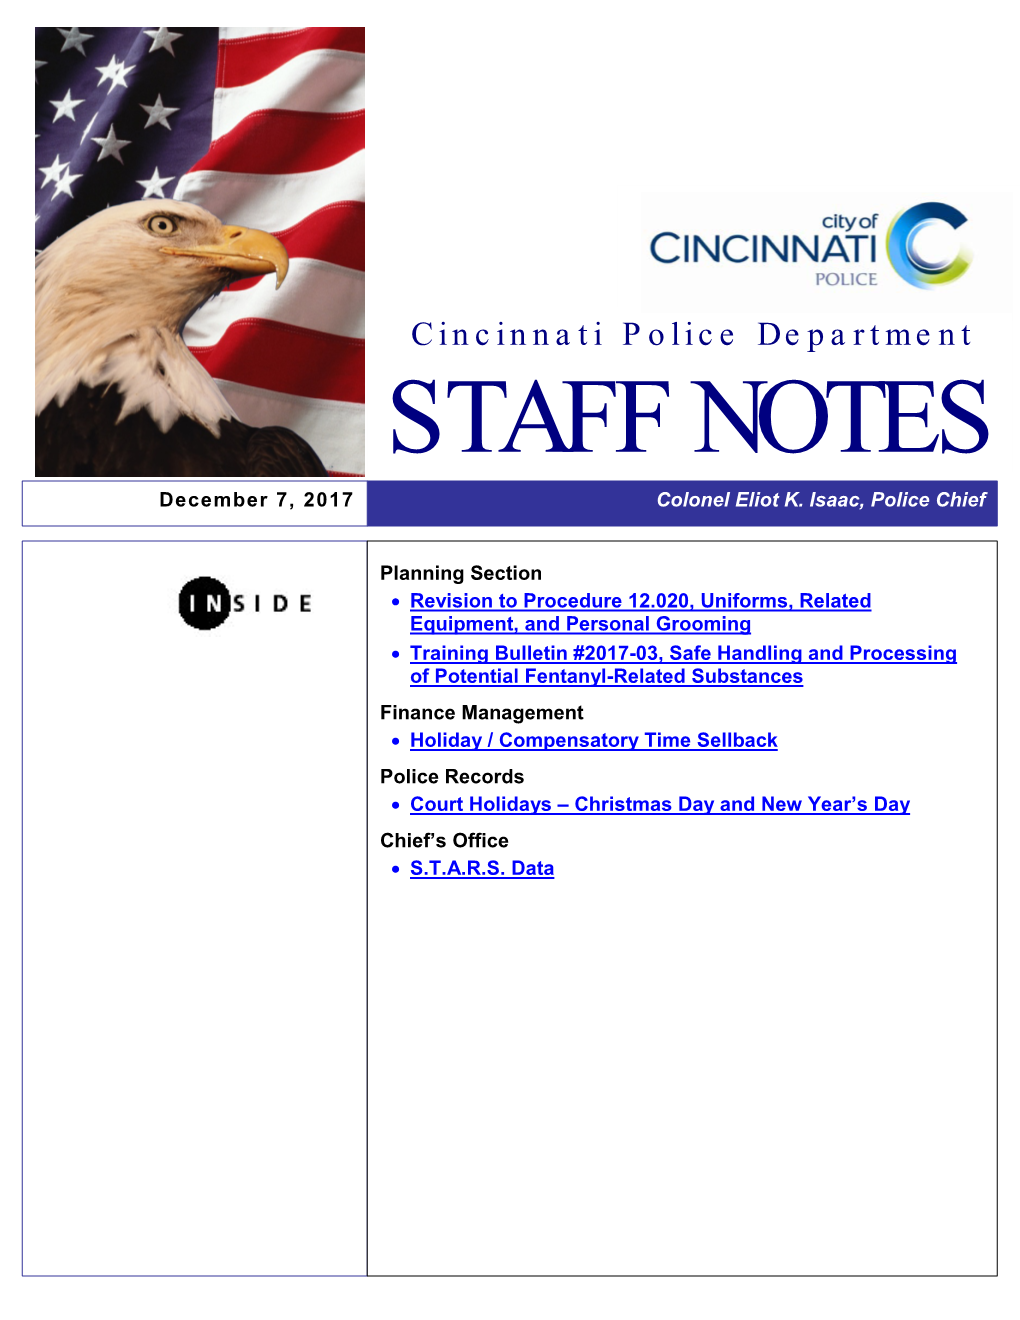 December 07, 2017 Weekly Staff Notes